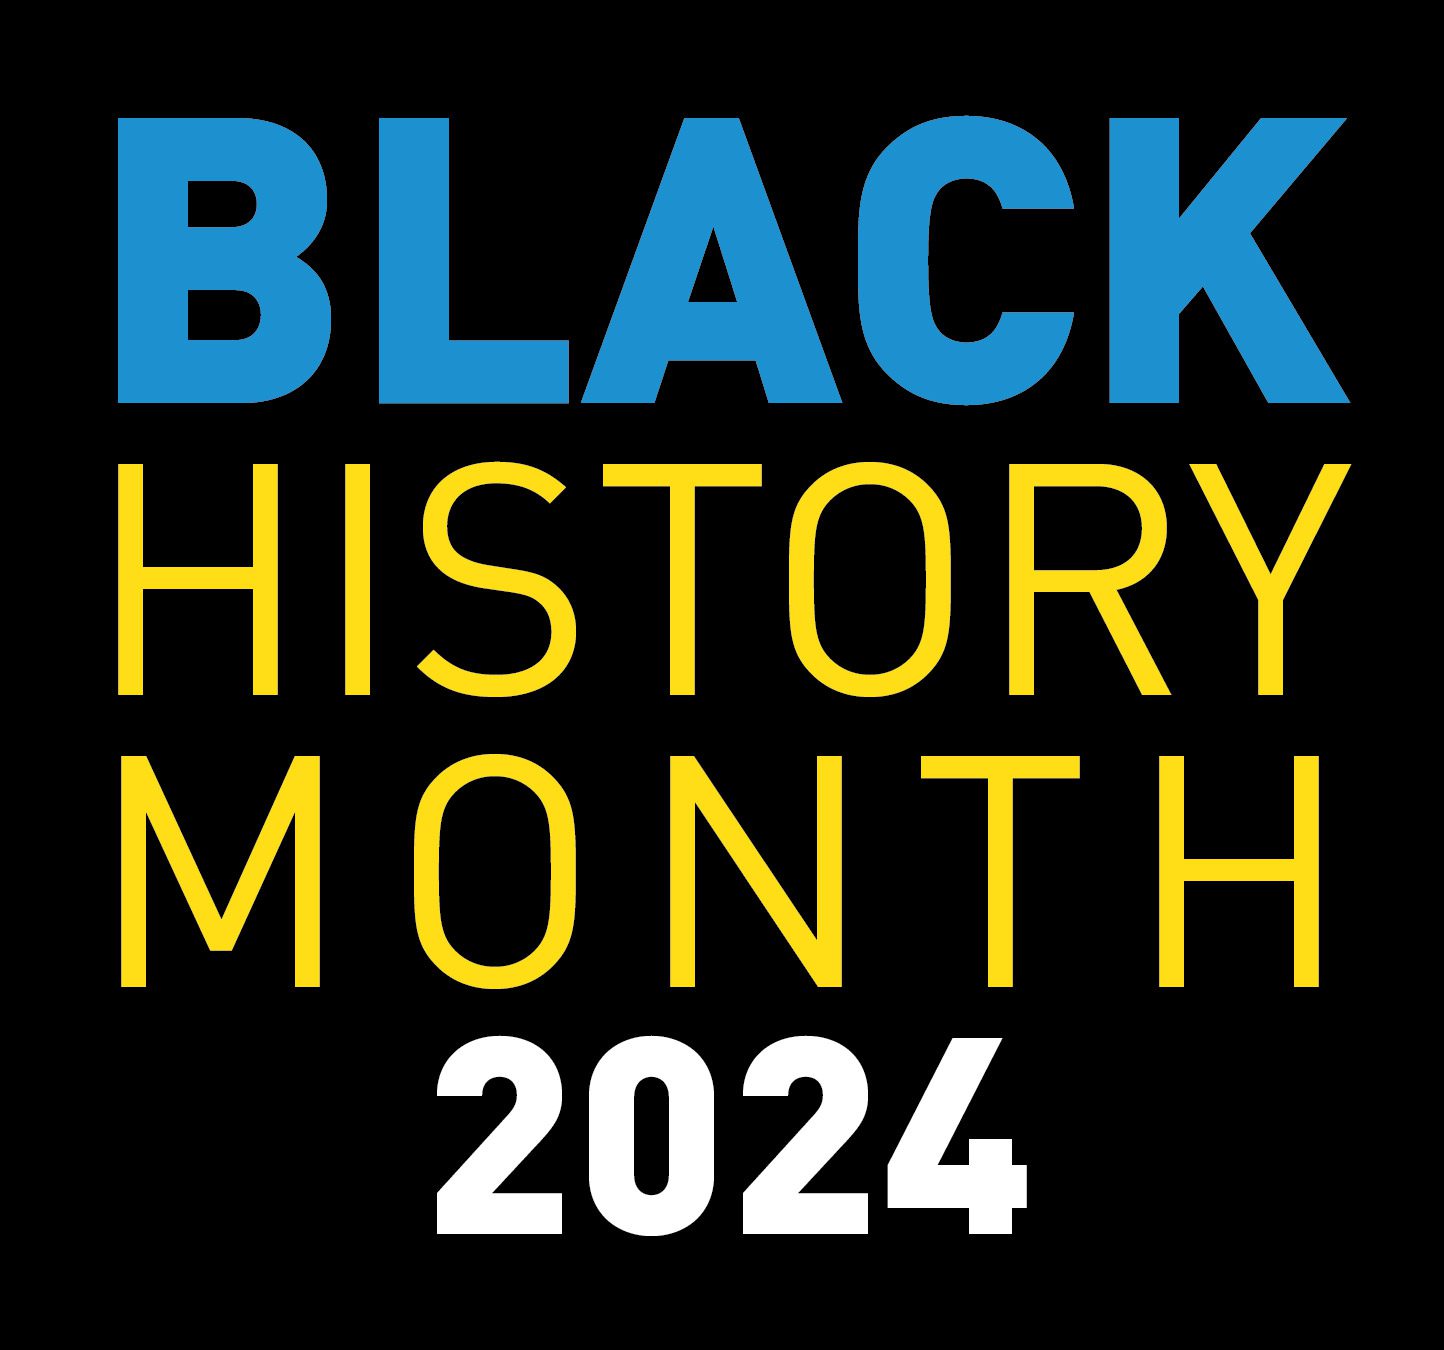 Graphic saying Black History Month 2024. Black background with blue text, yellow text, and white text.